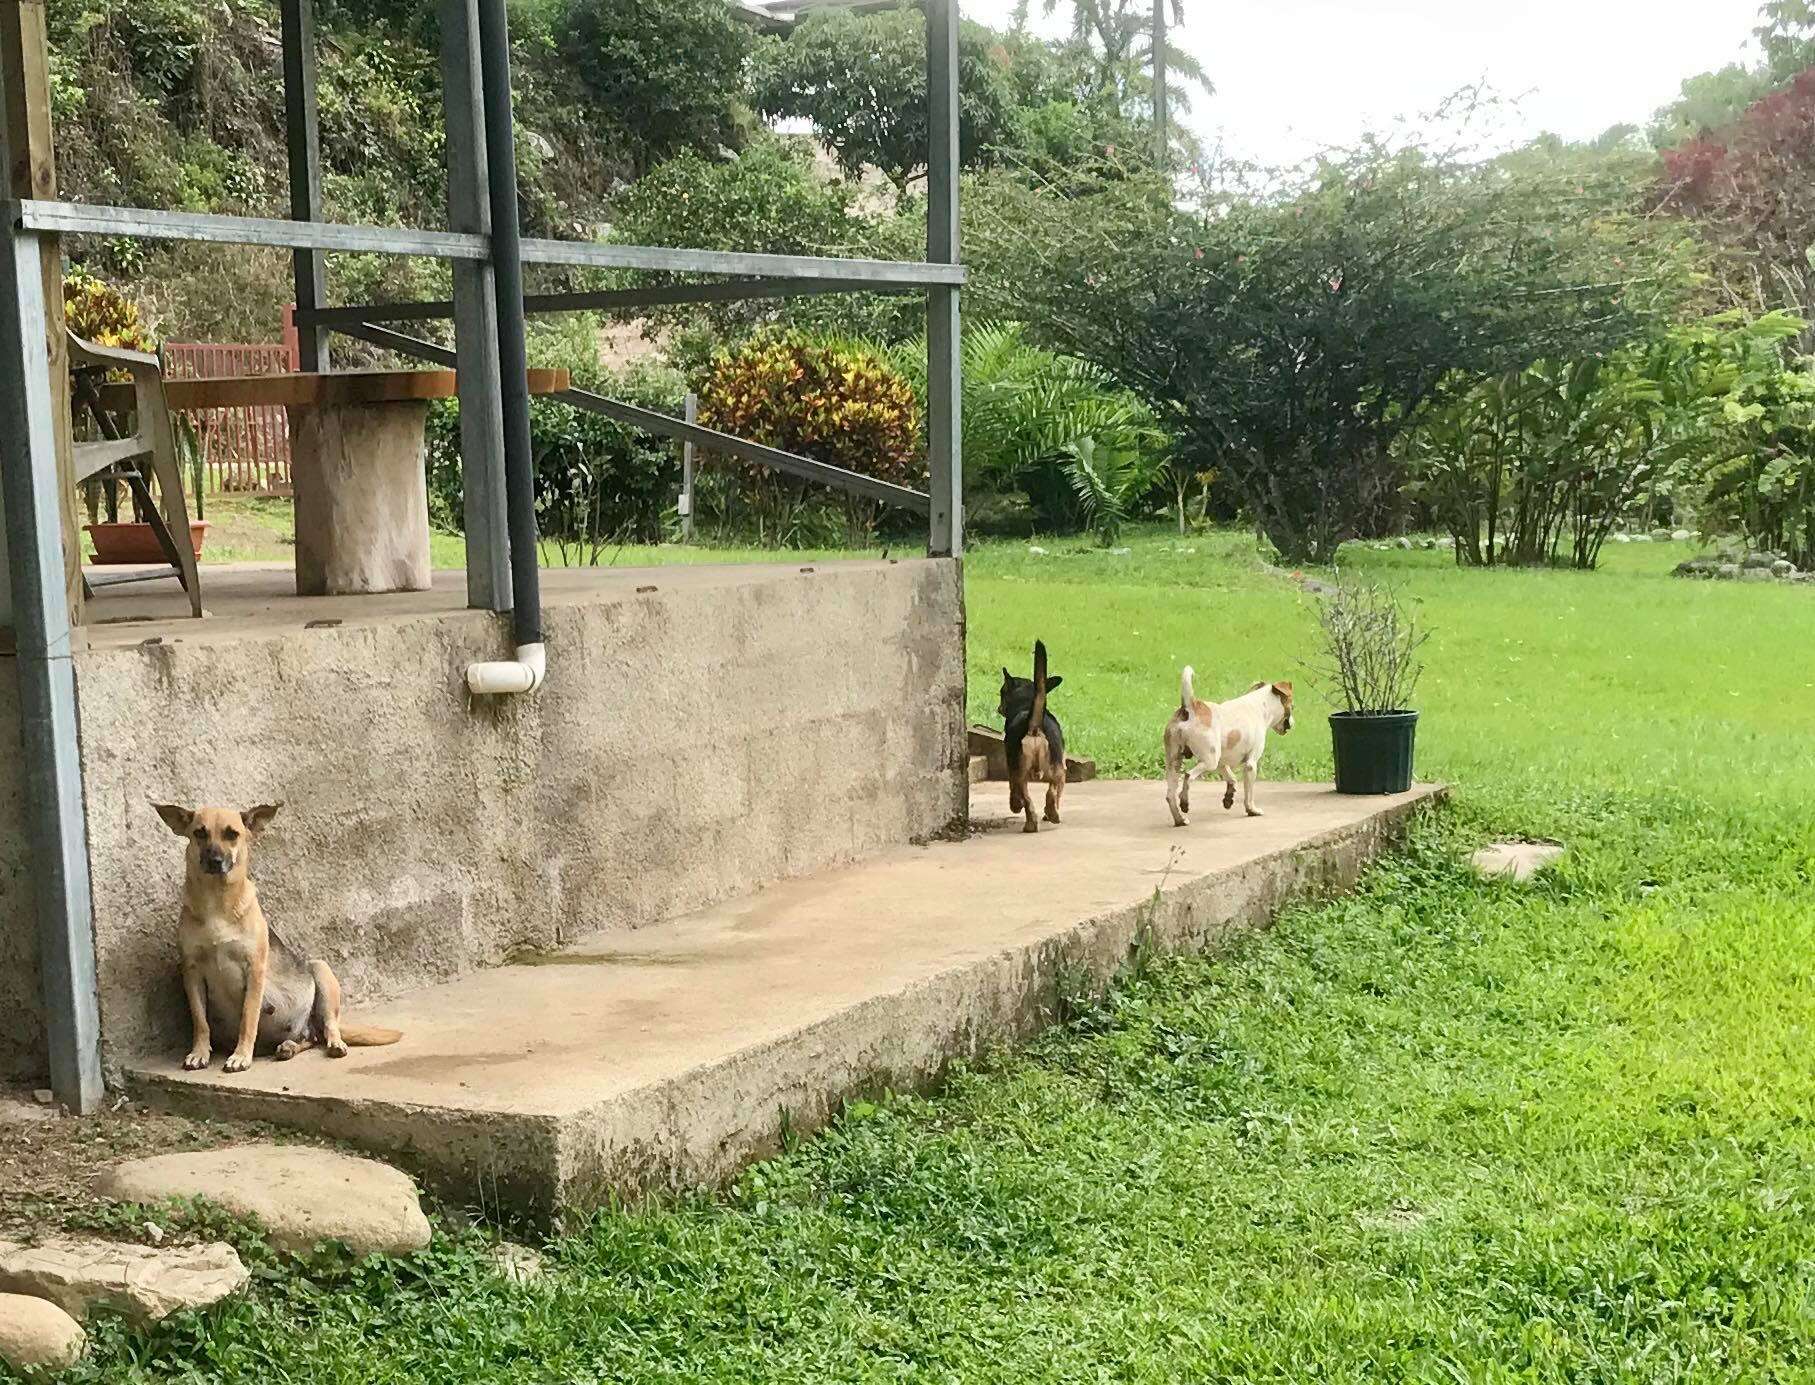 Abandoned pregnant dog in Costa Rica arrives at foster carer's home